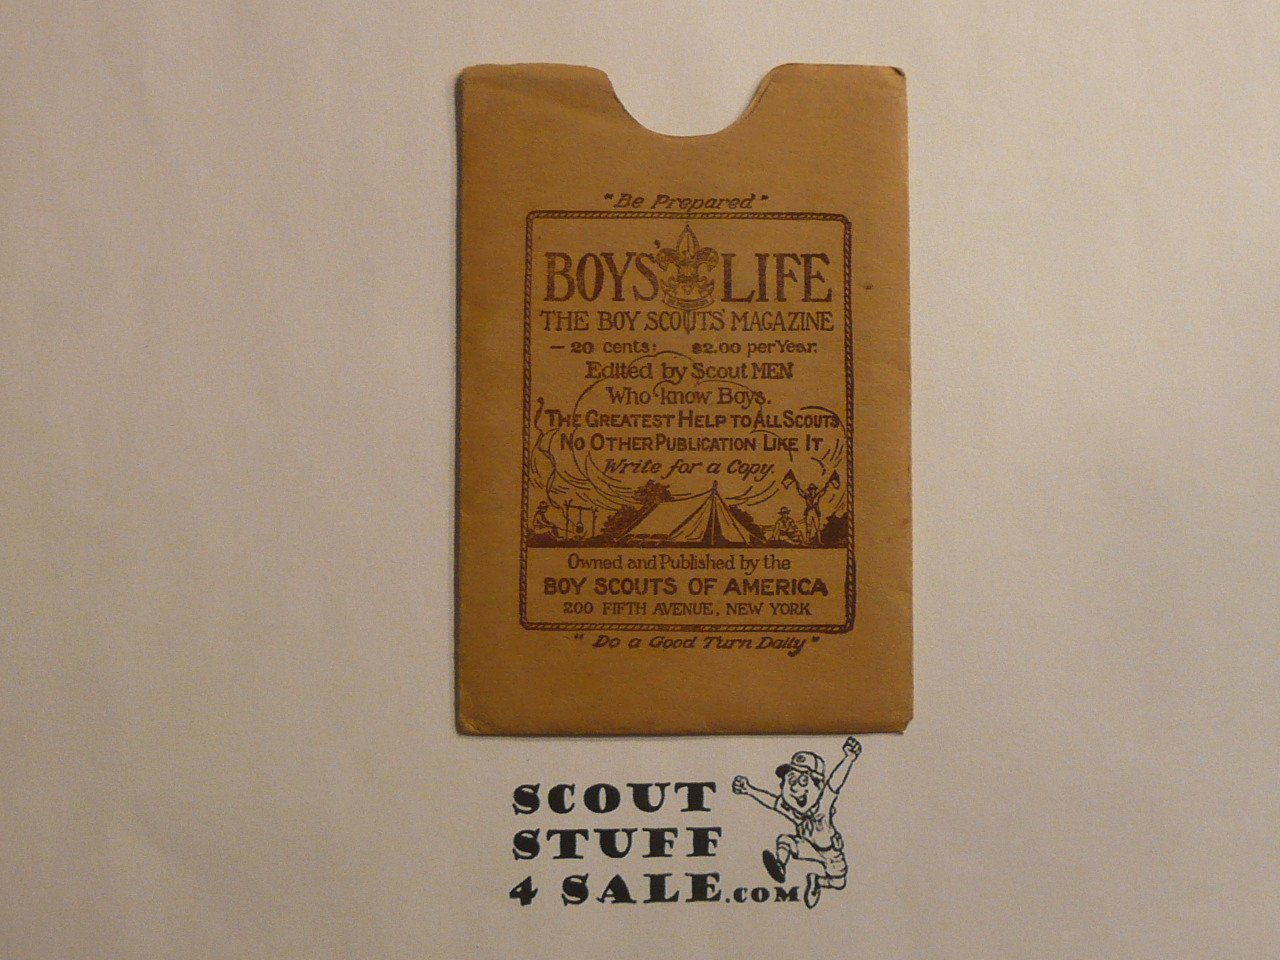 1928 Boy Scout Membership Card, with envelope, 3-fold, 7 signatures, expires June 1928, BSMC277